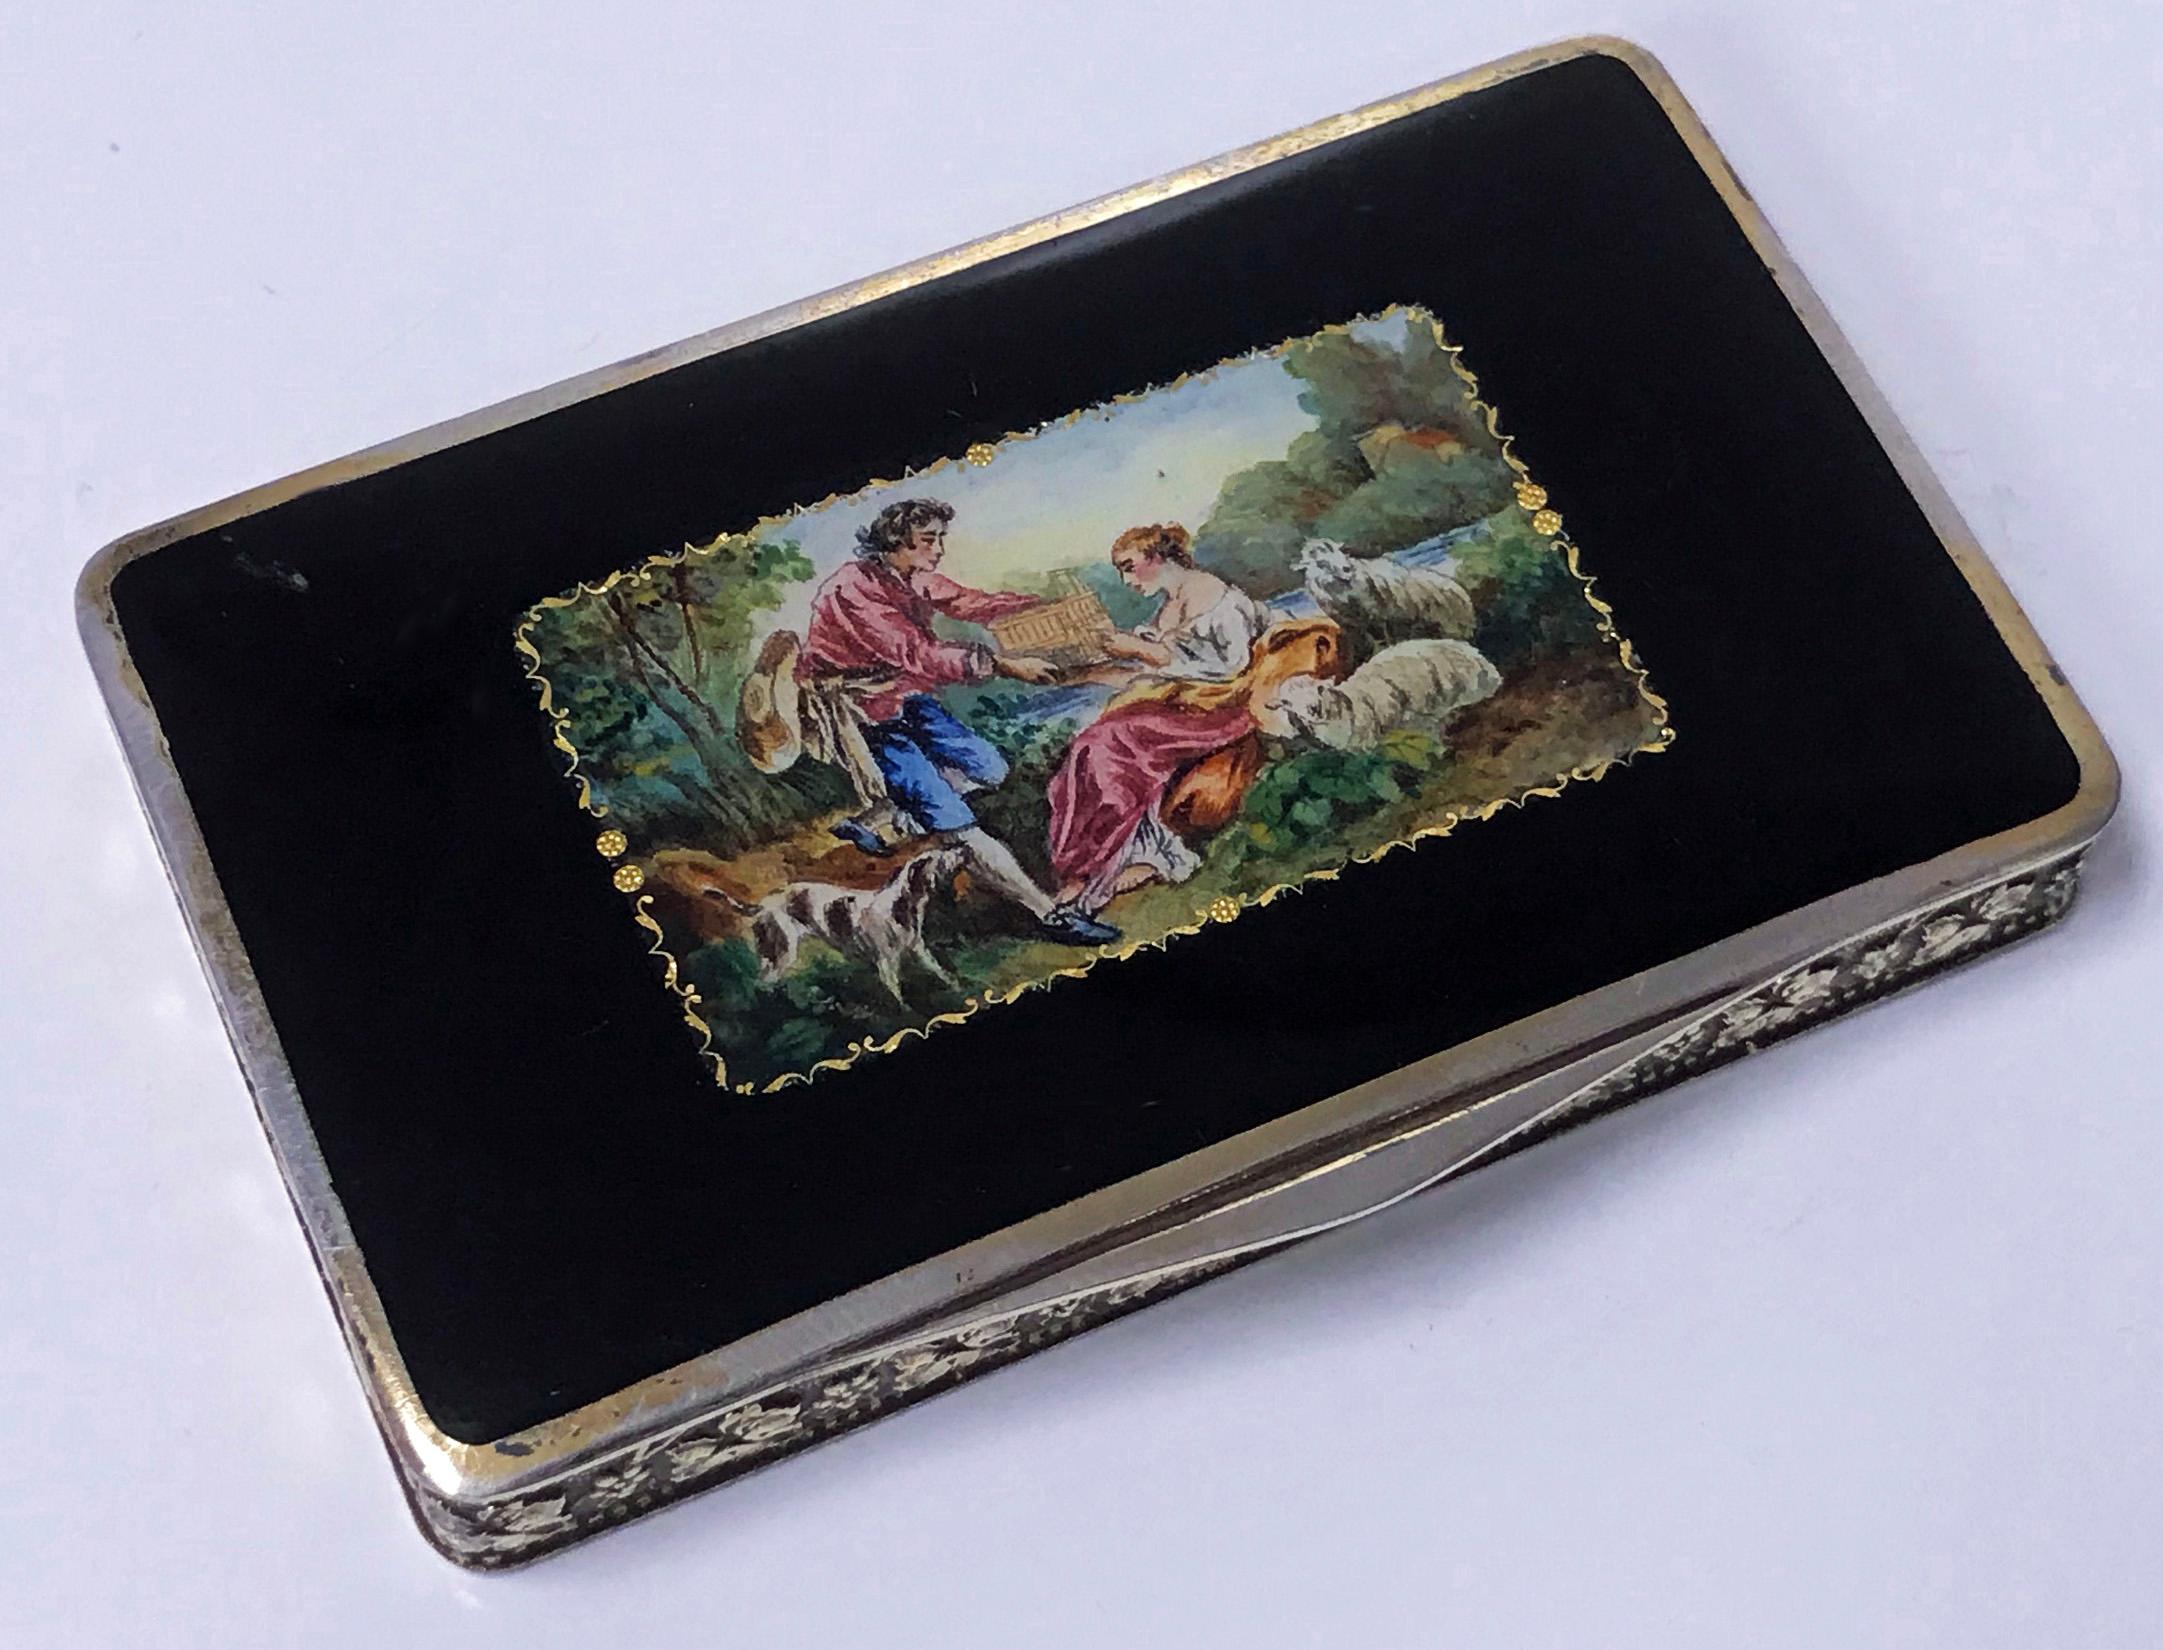 1920’s Austrian Sterling Silver hand painted enamel Box or Snuff Box with romantic pastoral scene, rosette foliage vermeil sides, engine turned base and gilded interior. Austrian hallmarks and also stamped Sterling Silver and number 946 on interior.